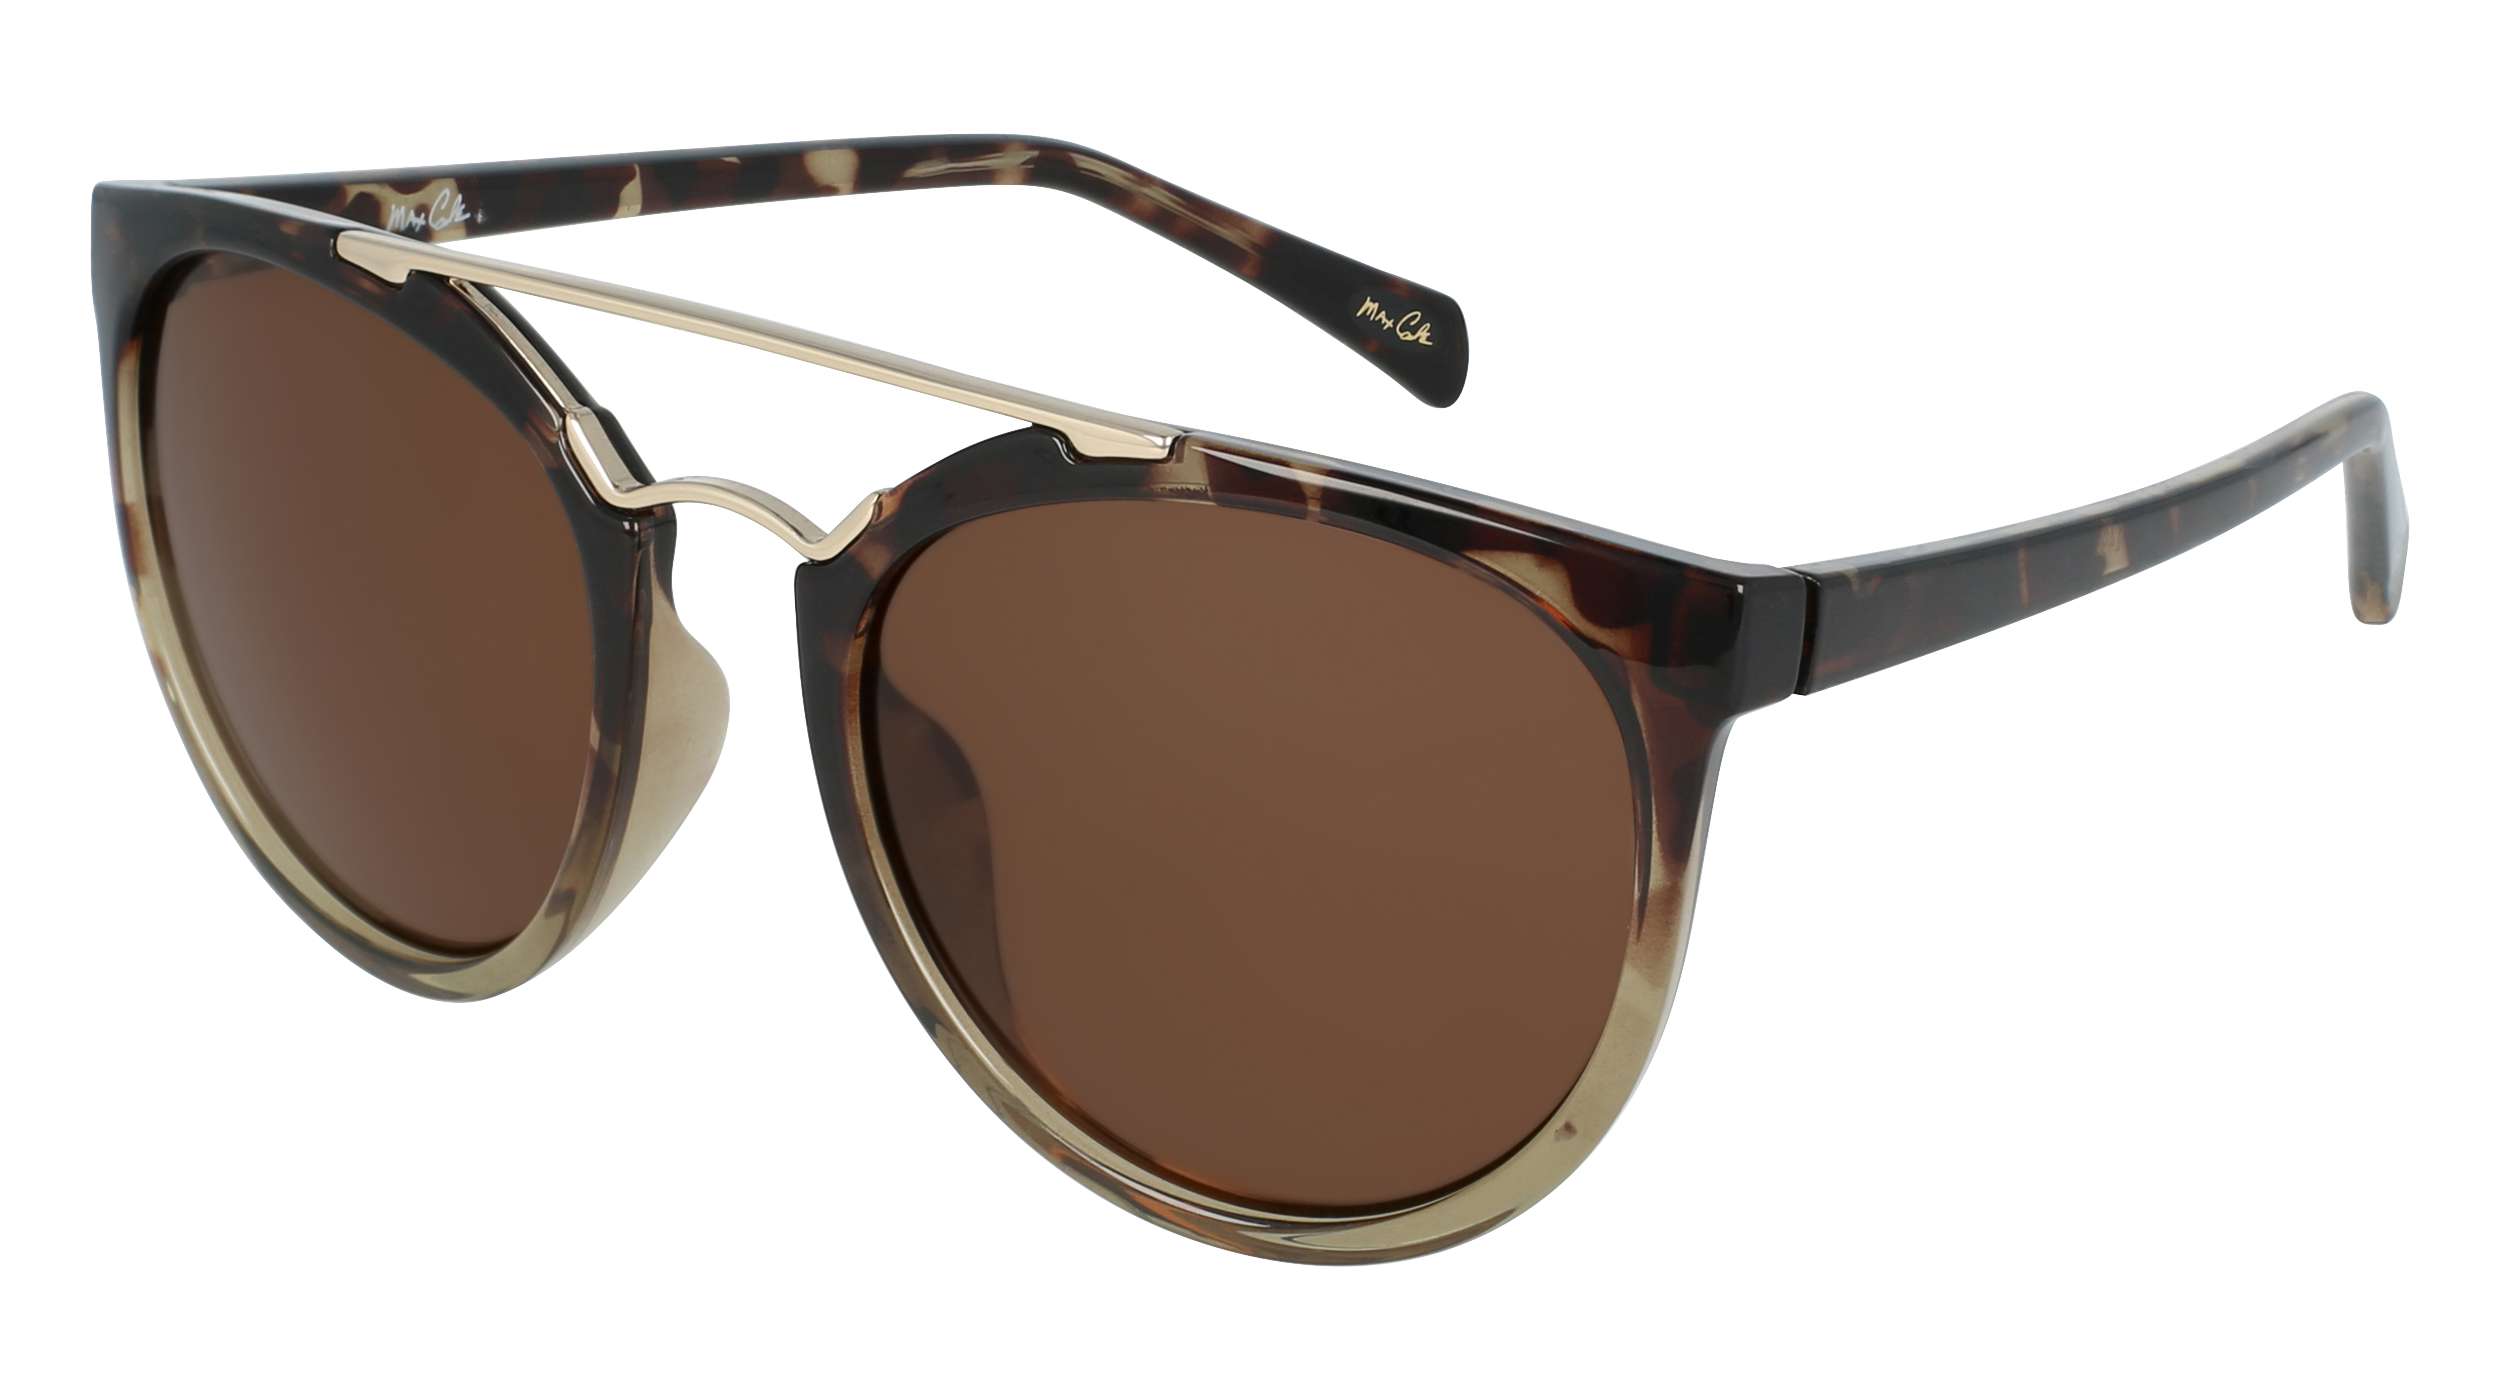 M MC 1495 women's sunglasses (from the side)